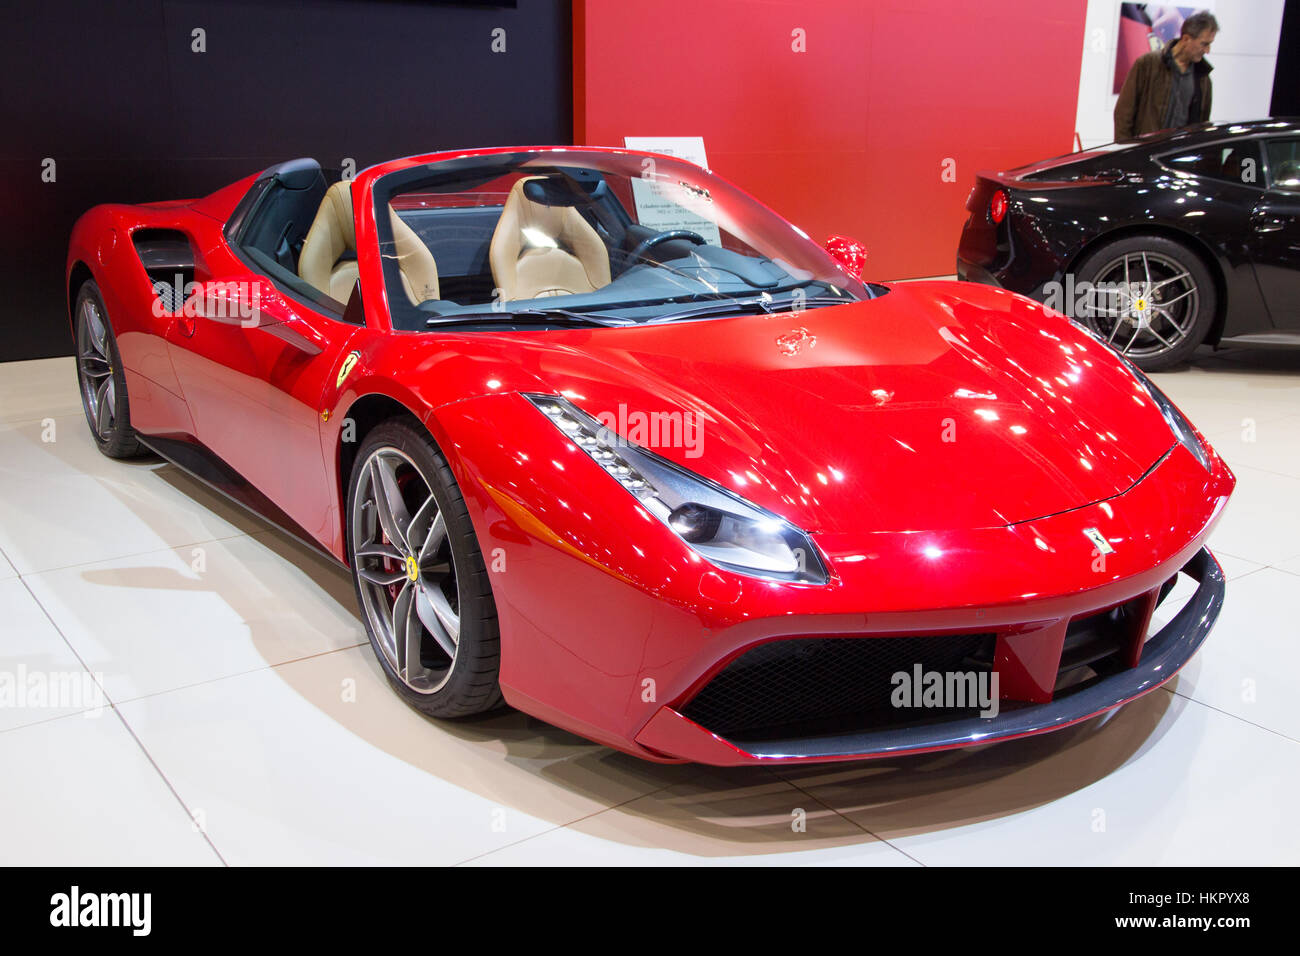 BRUSSELS - JAN 12, 2016: Red Ferrari 488 Spider sports car shown at the  Brussels Motor Show Stock Photo - Alamy